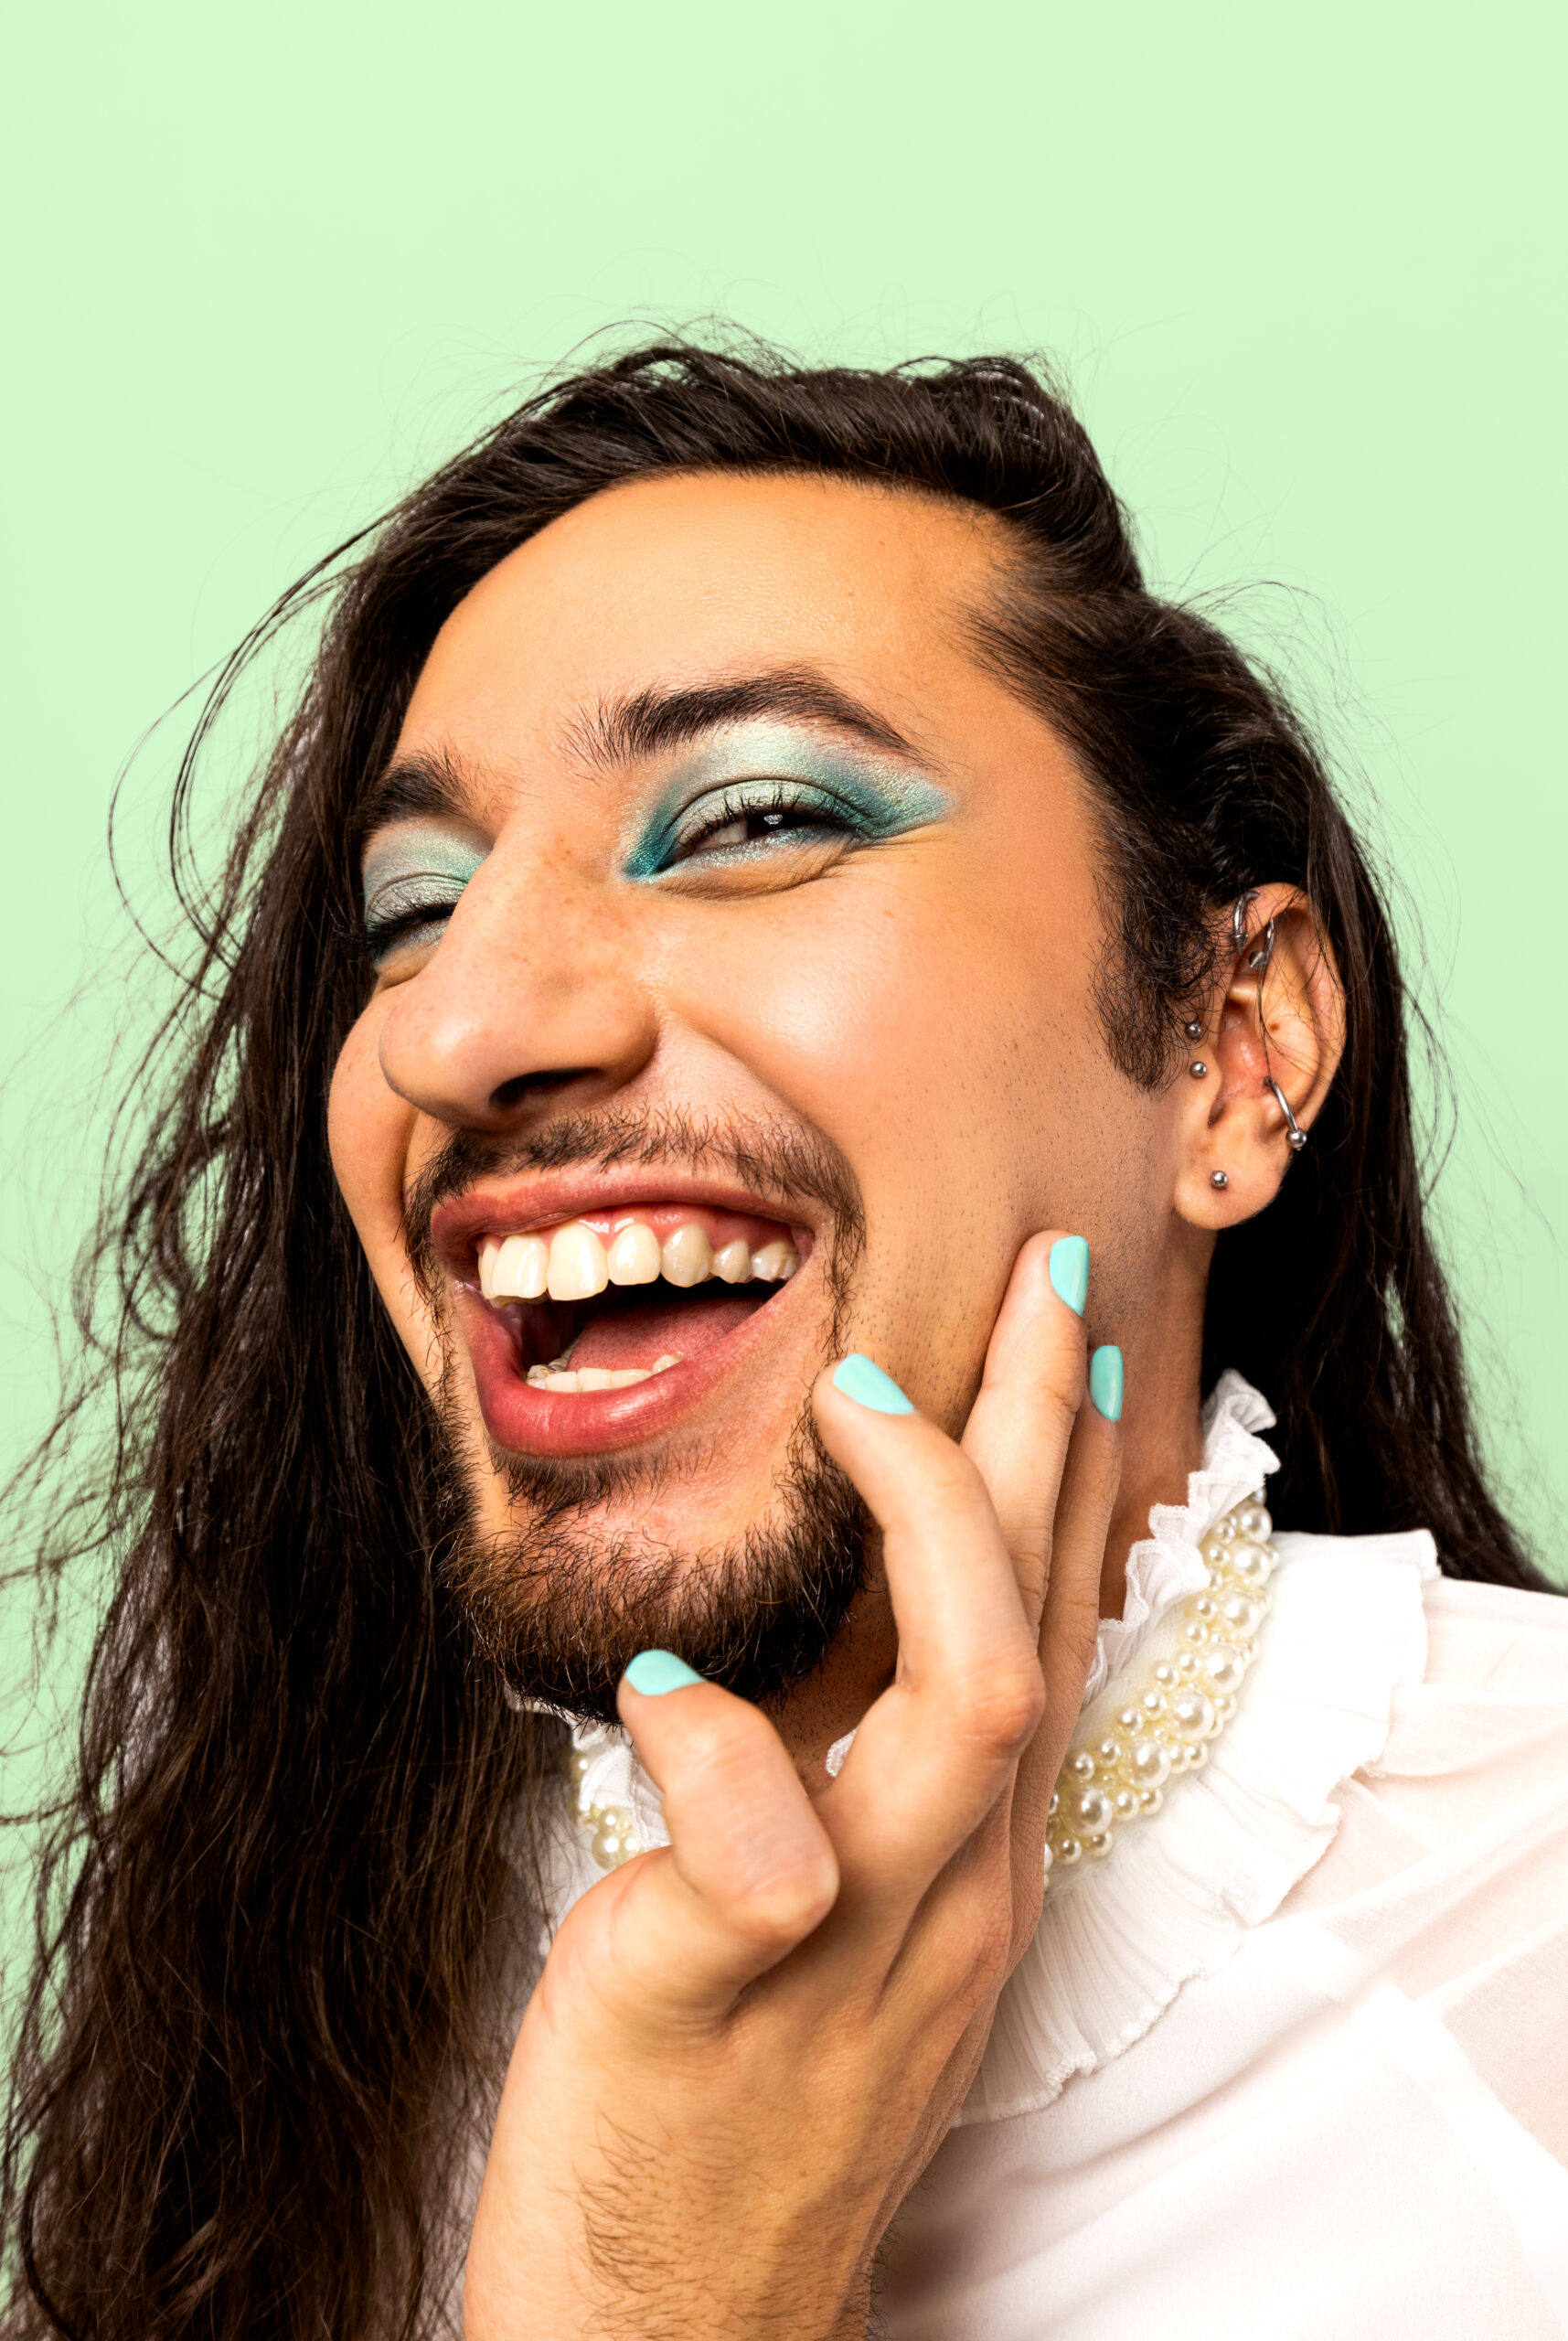 Indigenous model wearing blue eyeshadow and teal nail polish posing with hair against the face while laughing against a green backdrop.